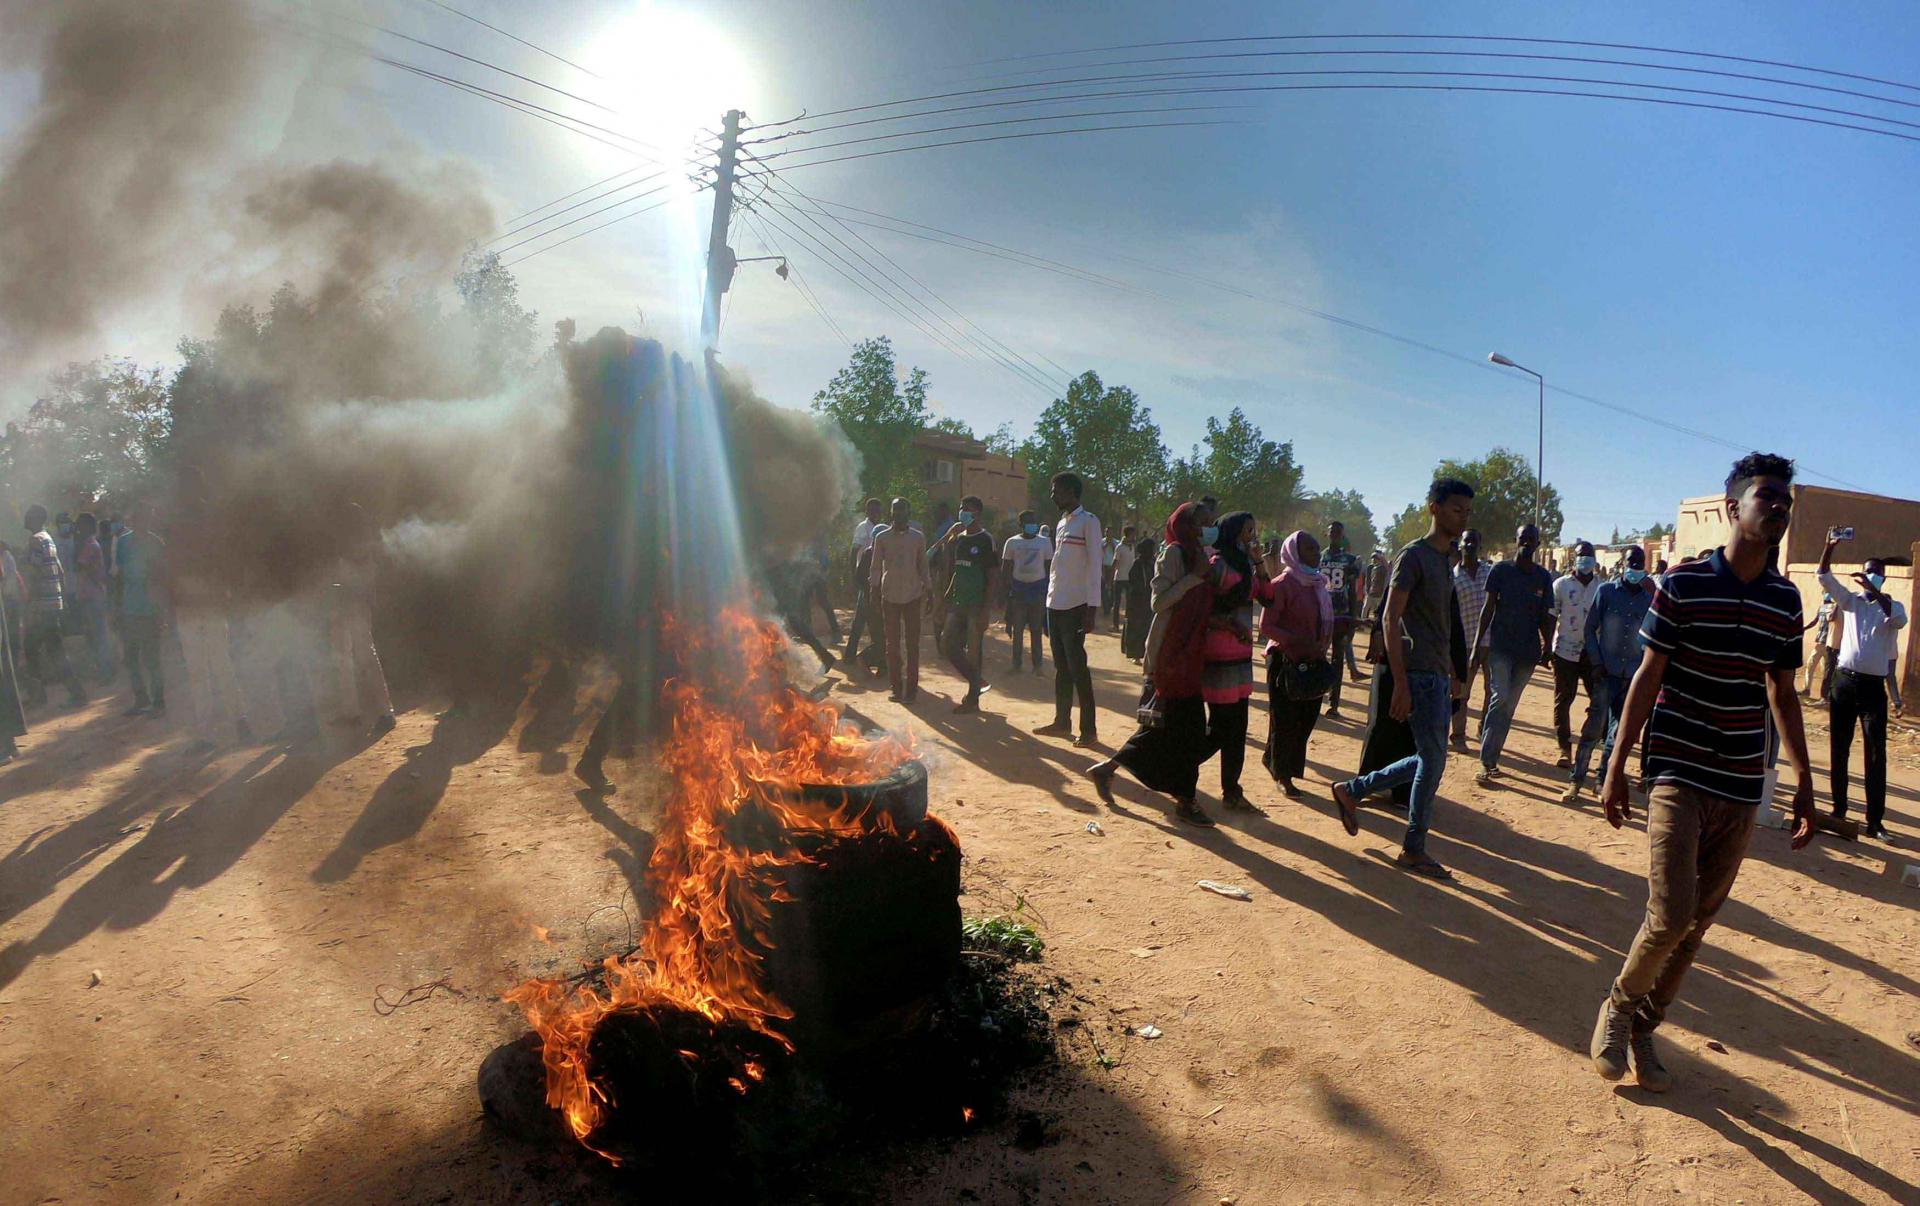 The mushrooming protests are widely seen as the biggest threat to Bashir's iron-fisted rule 